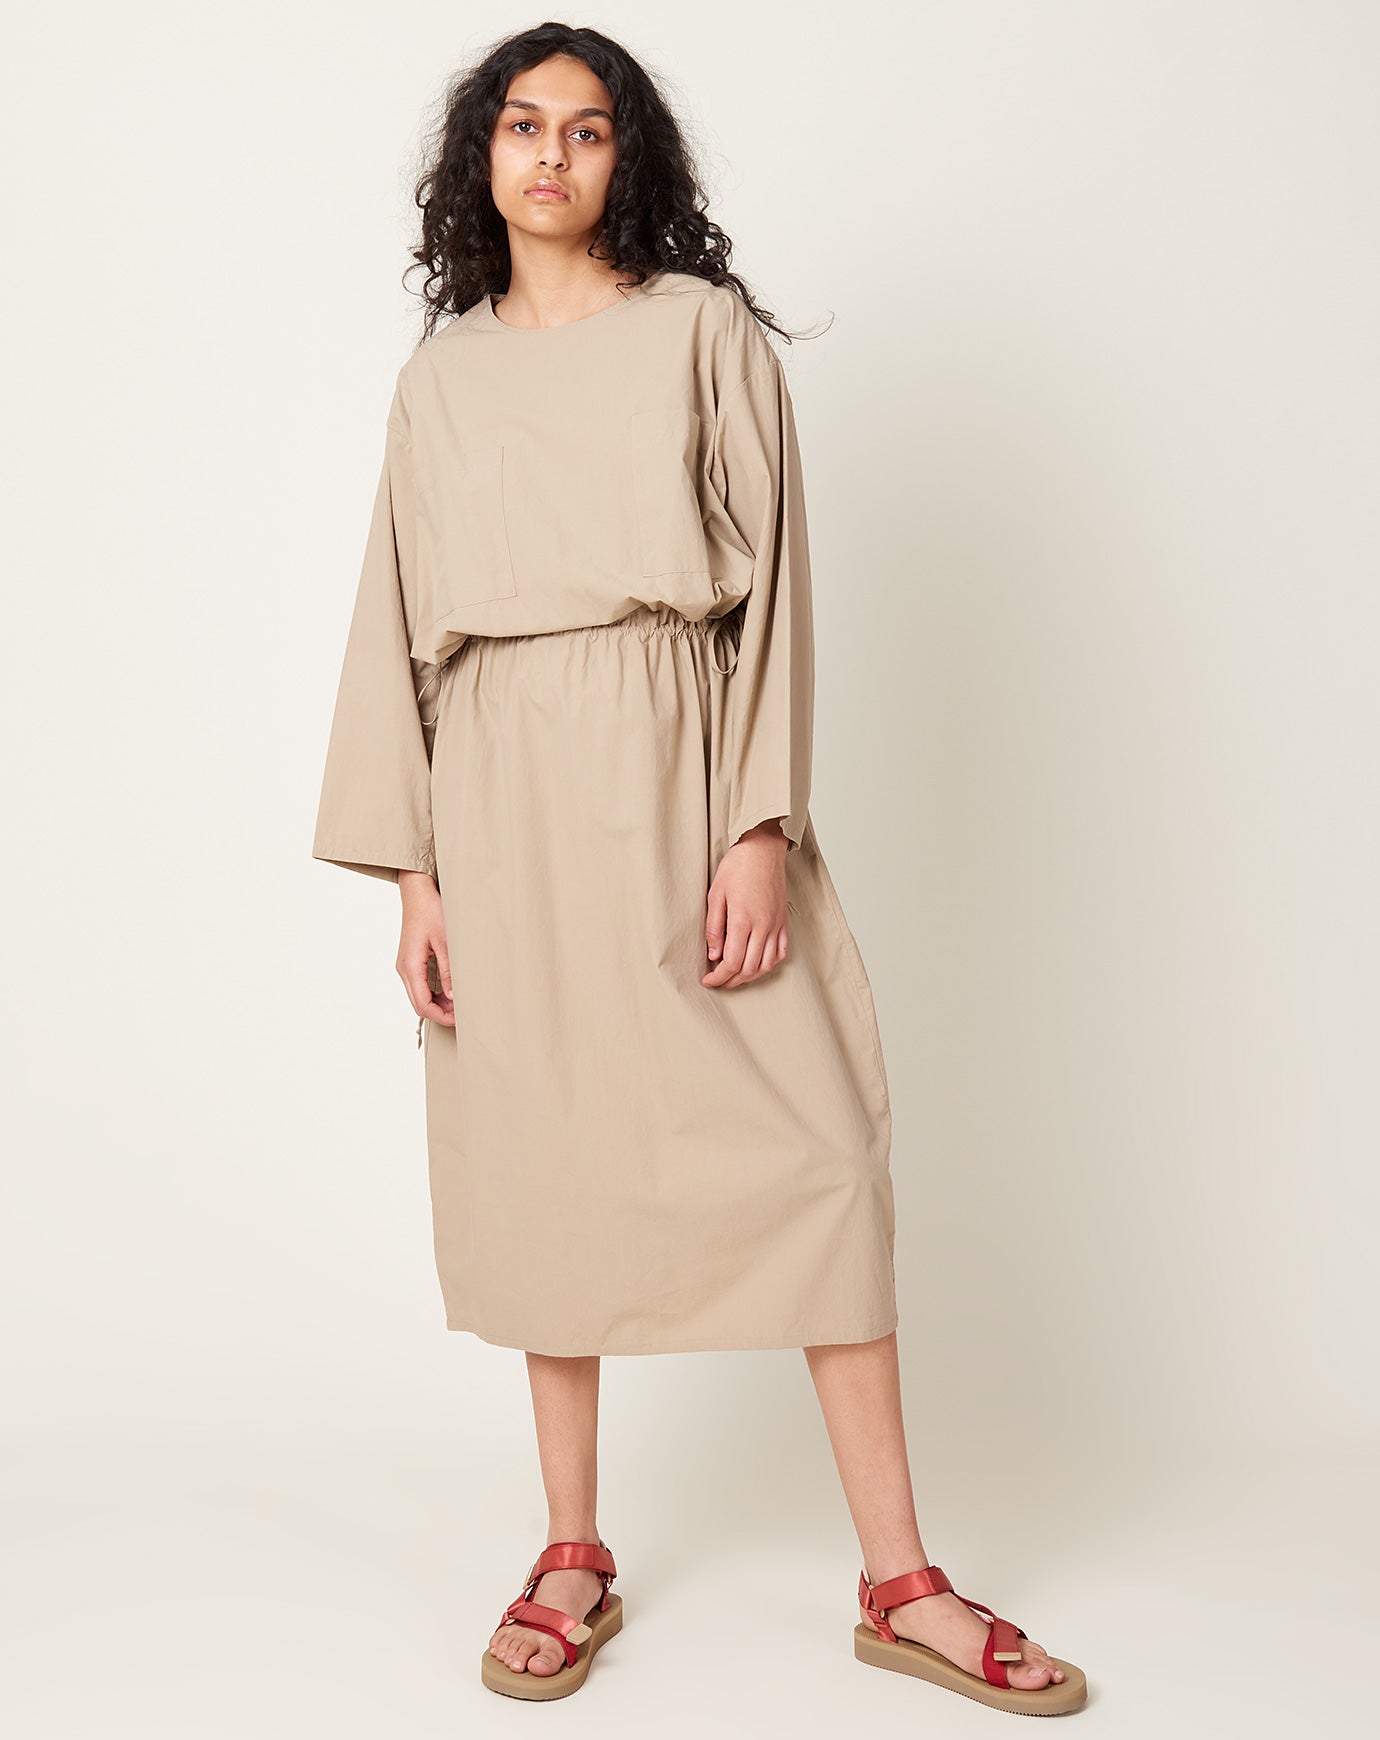 Modern Weaving Drawstring Slouch Pocket Dress in Taupe